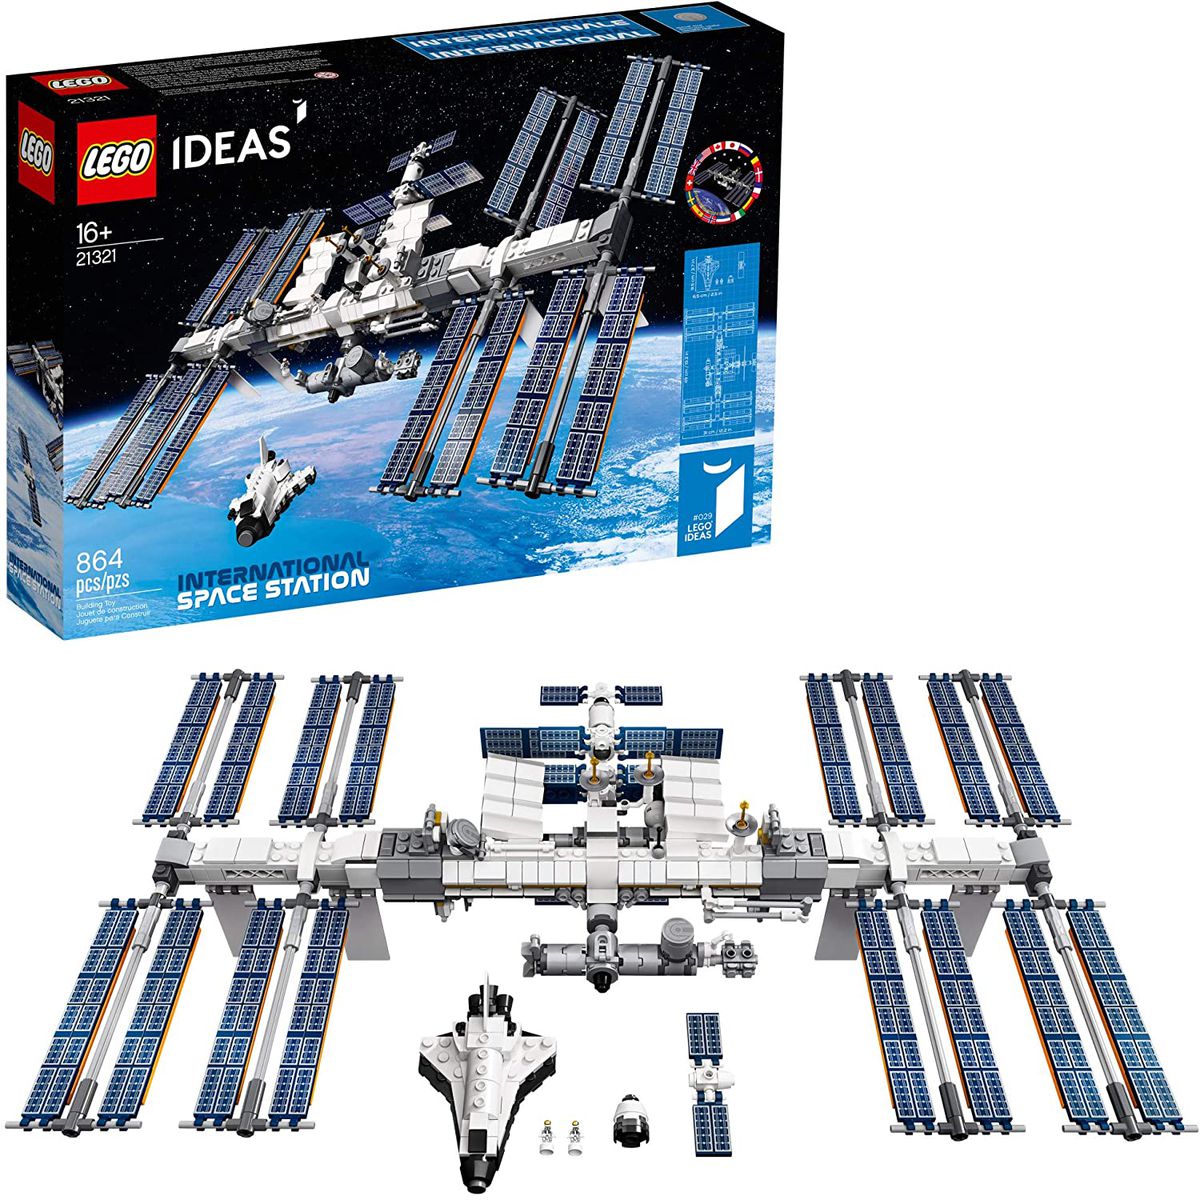 The box and finished product for the International Space Station Lego Ideas set